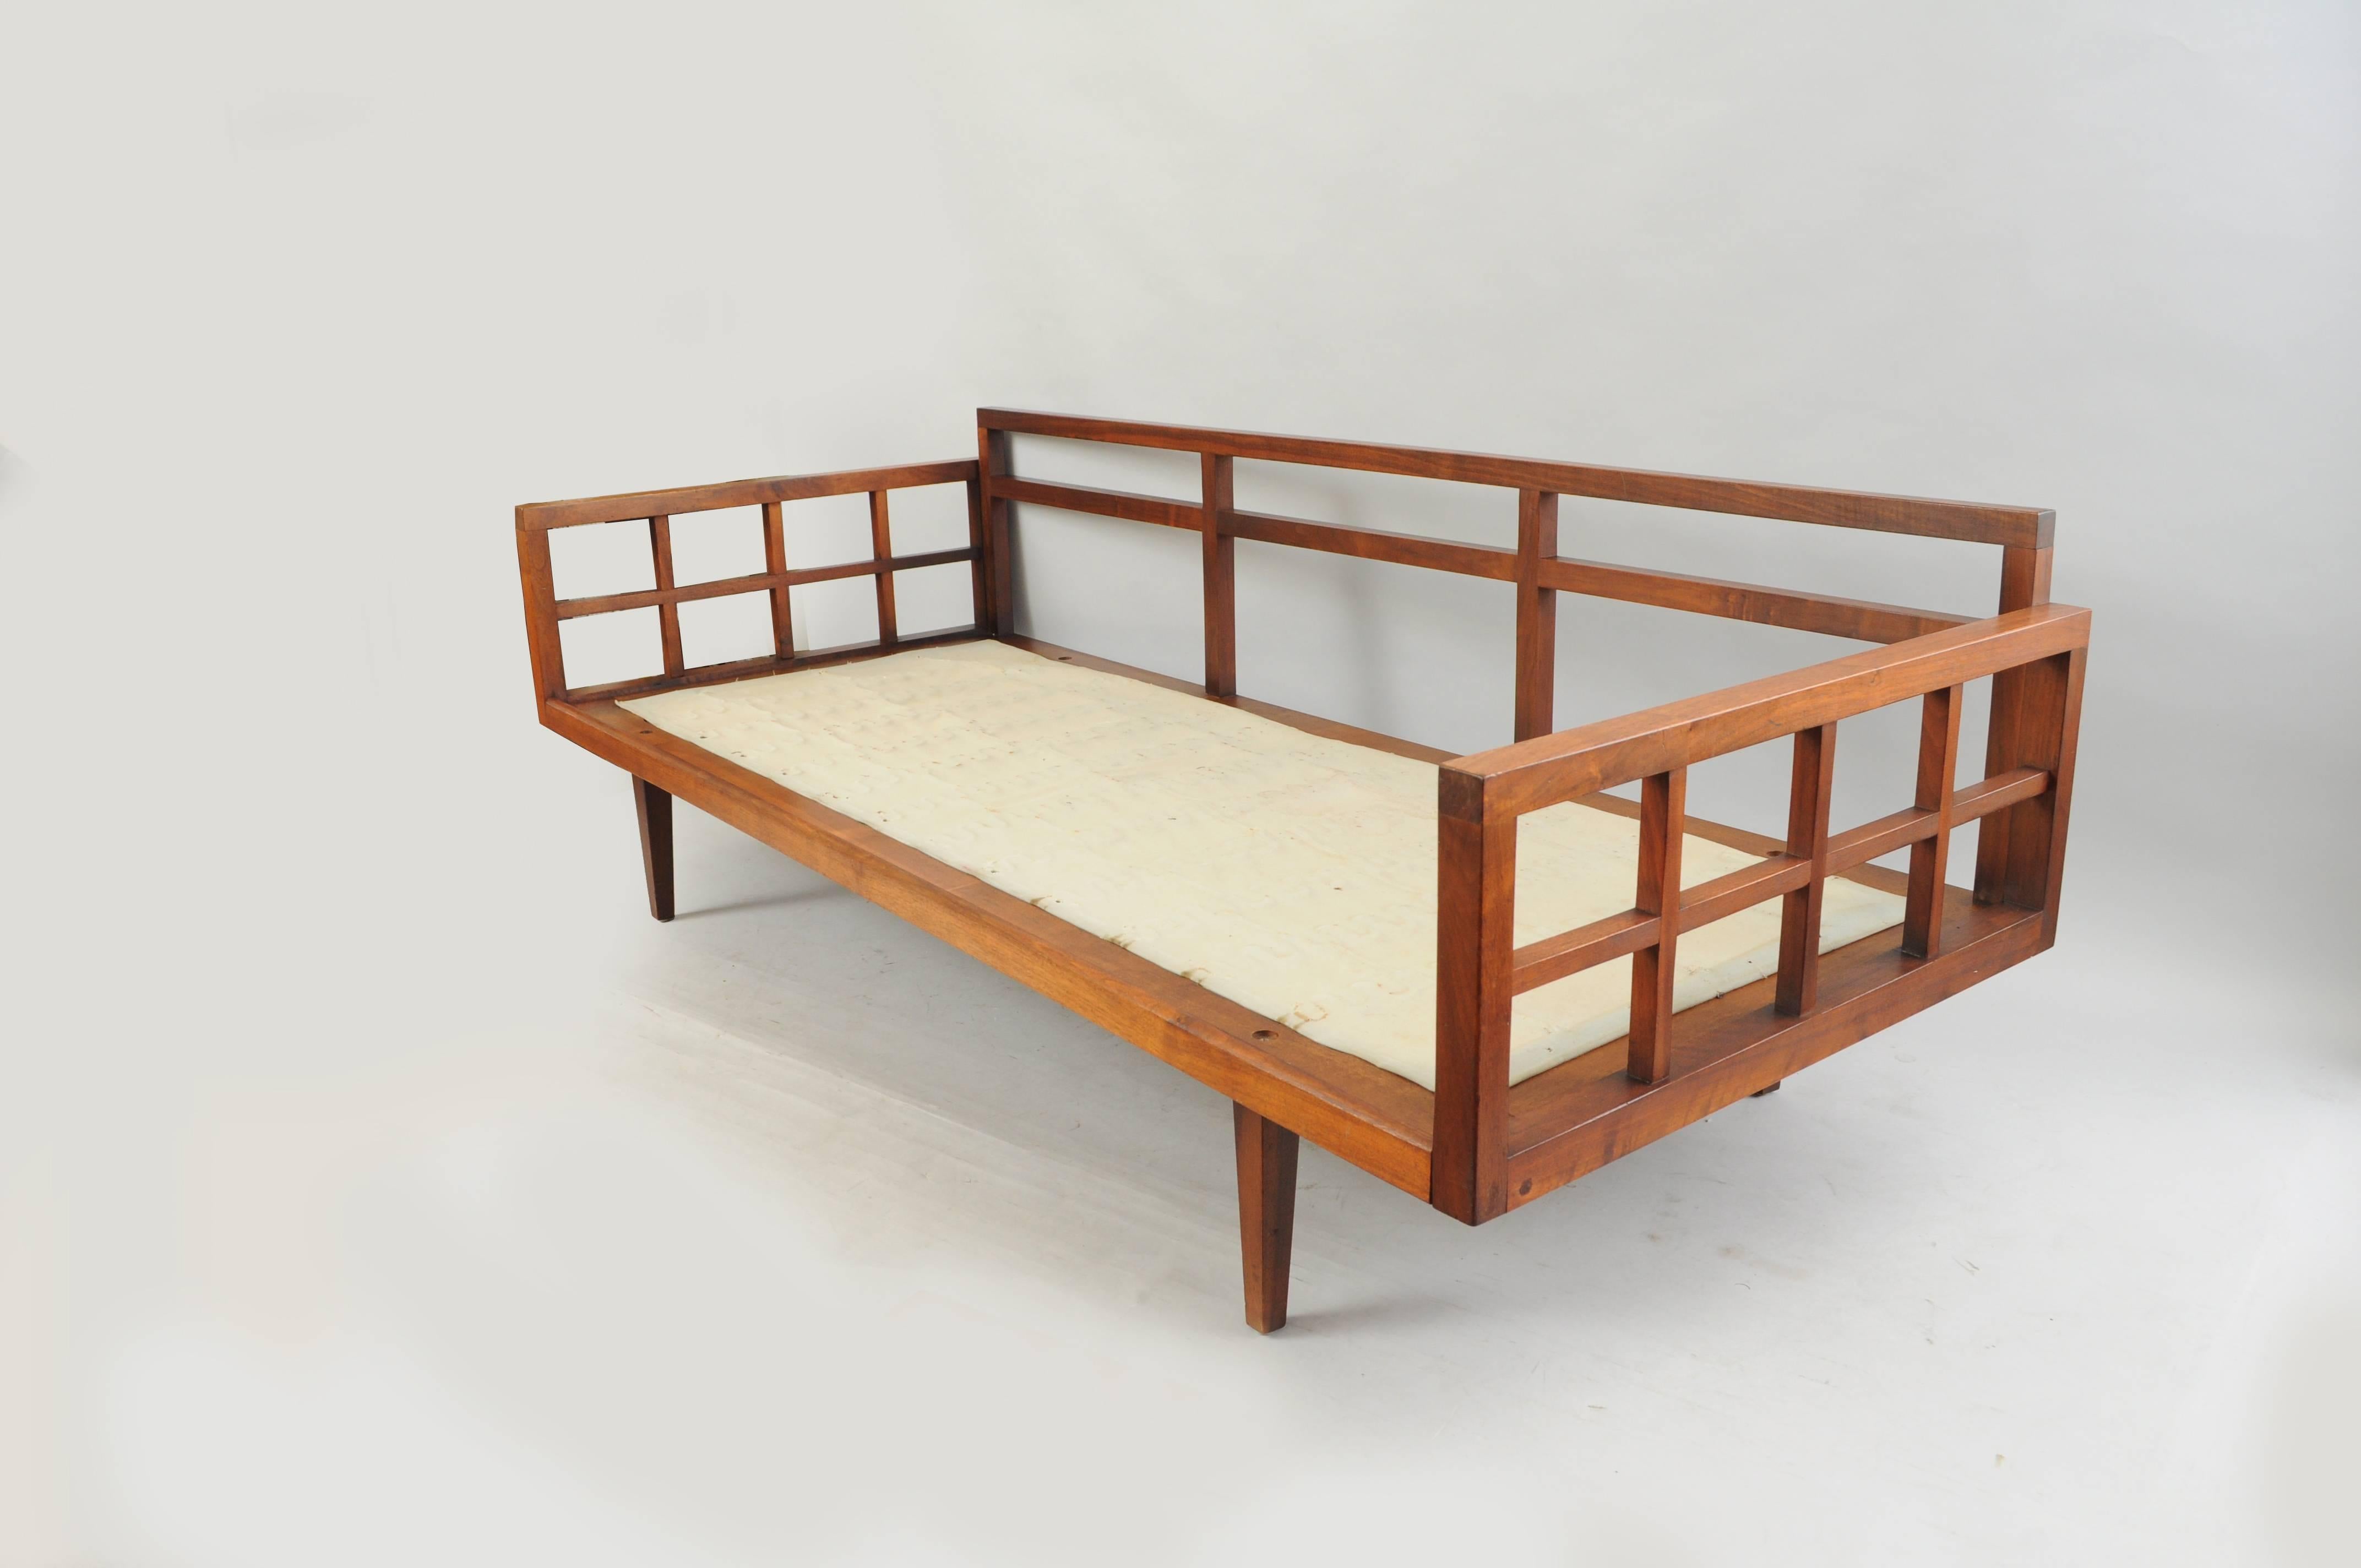 Vintage Mid-Century Modern teak and walnut wood sofa after Peter Hvidt in the Danish style. Item features a solid wood construction, open cut-out design, clean Modernist lines, square frame, tapered legs, beautiful wood grain, and great overall